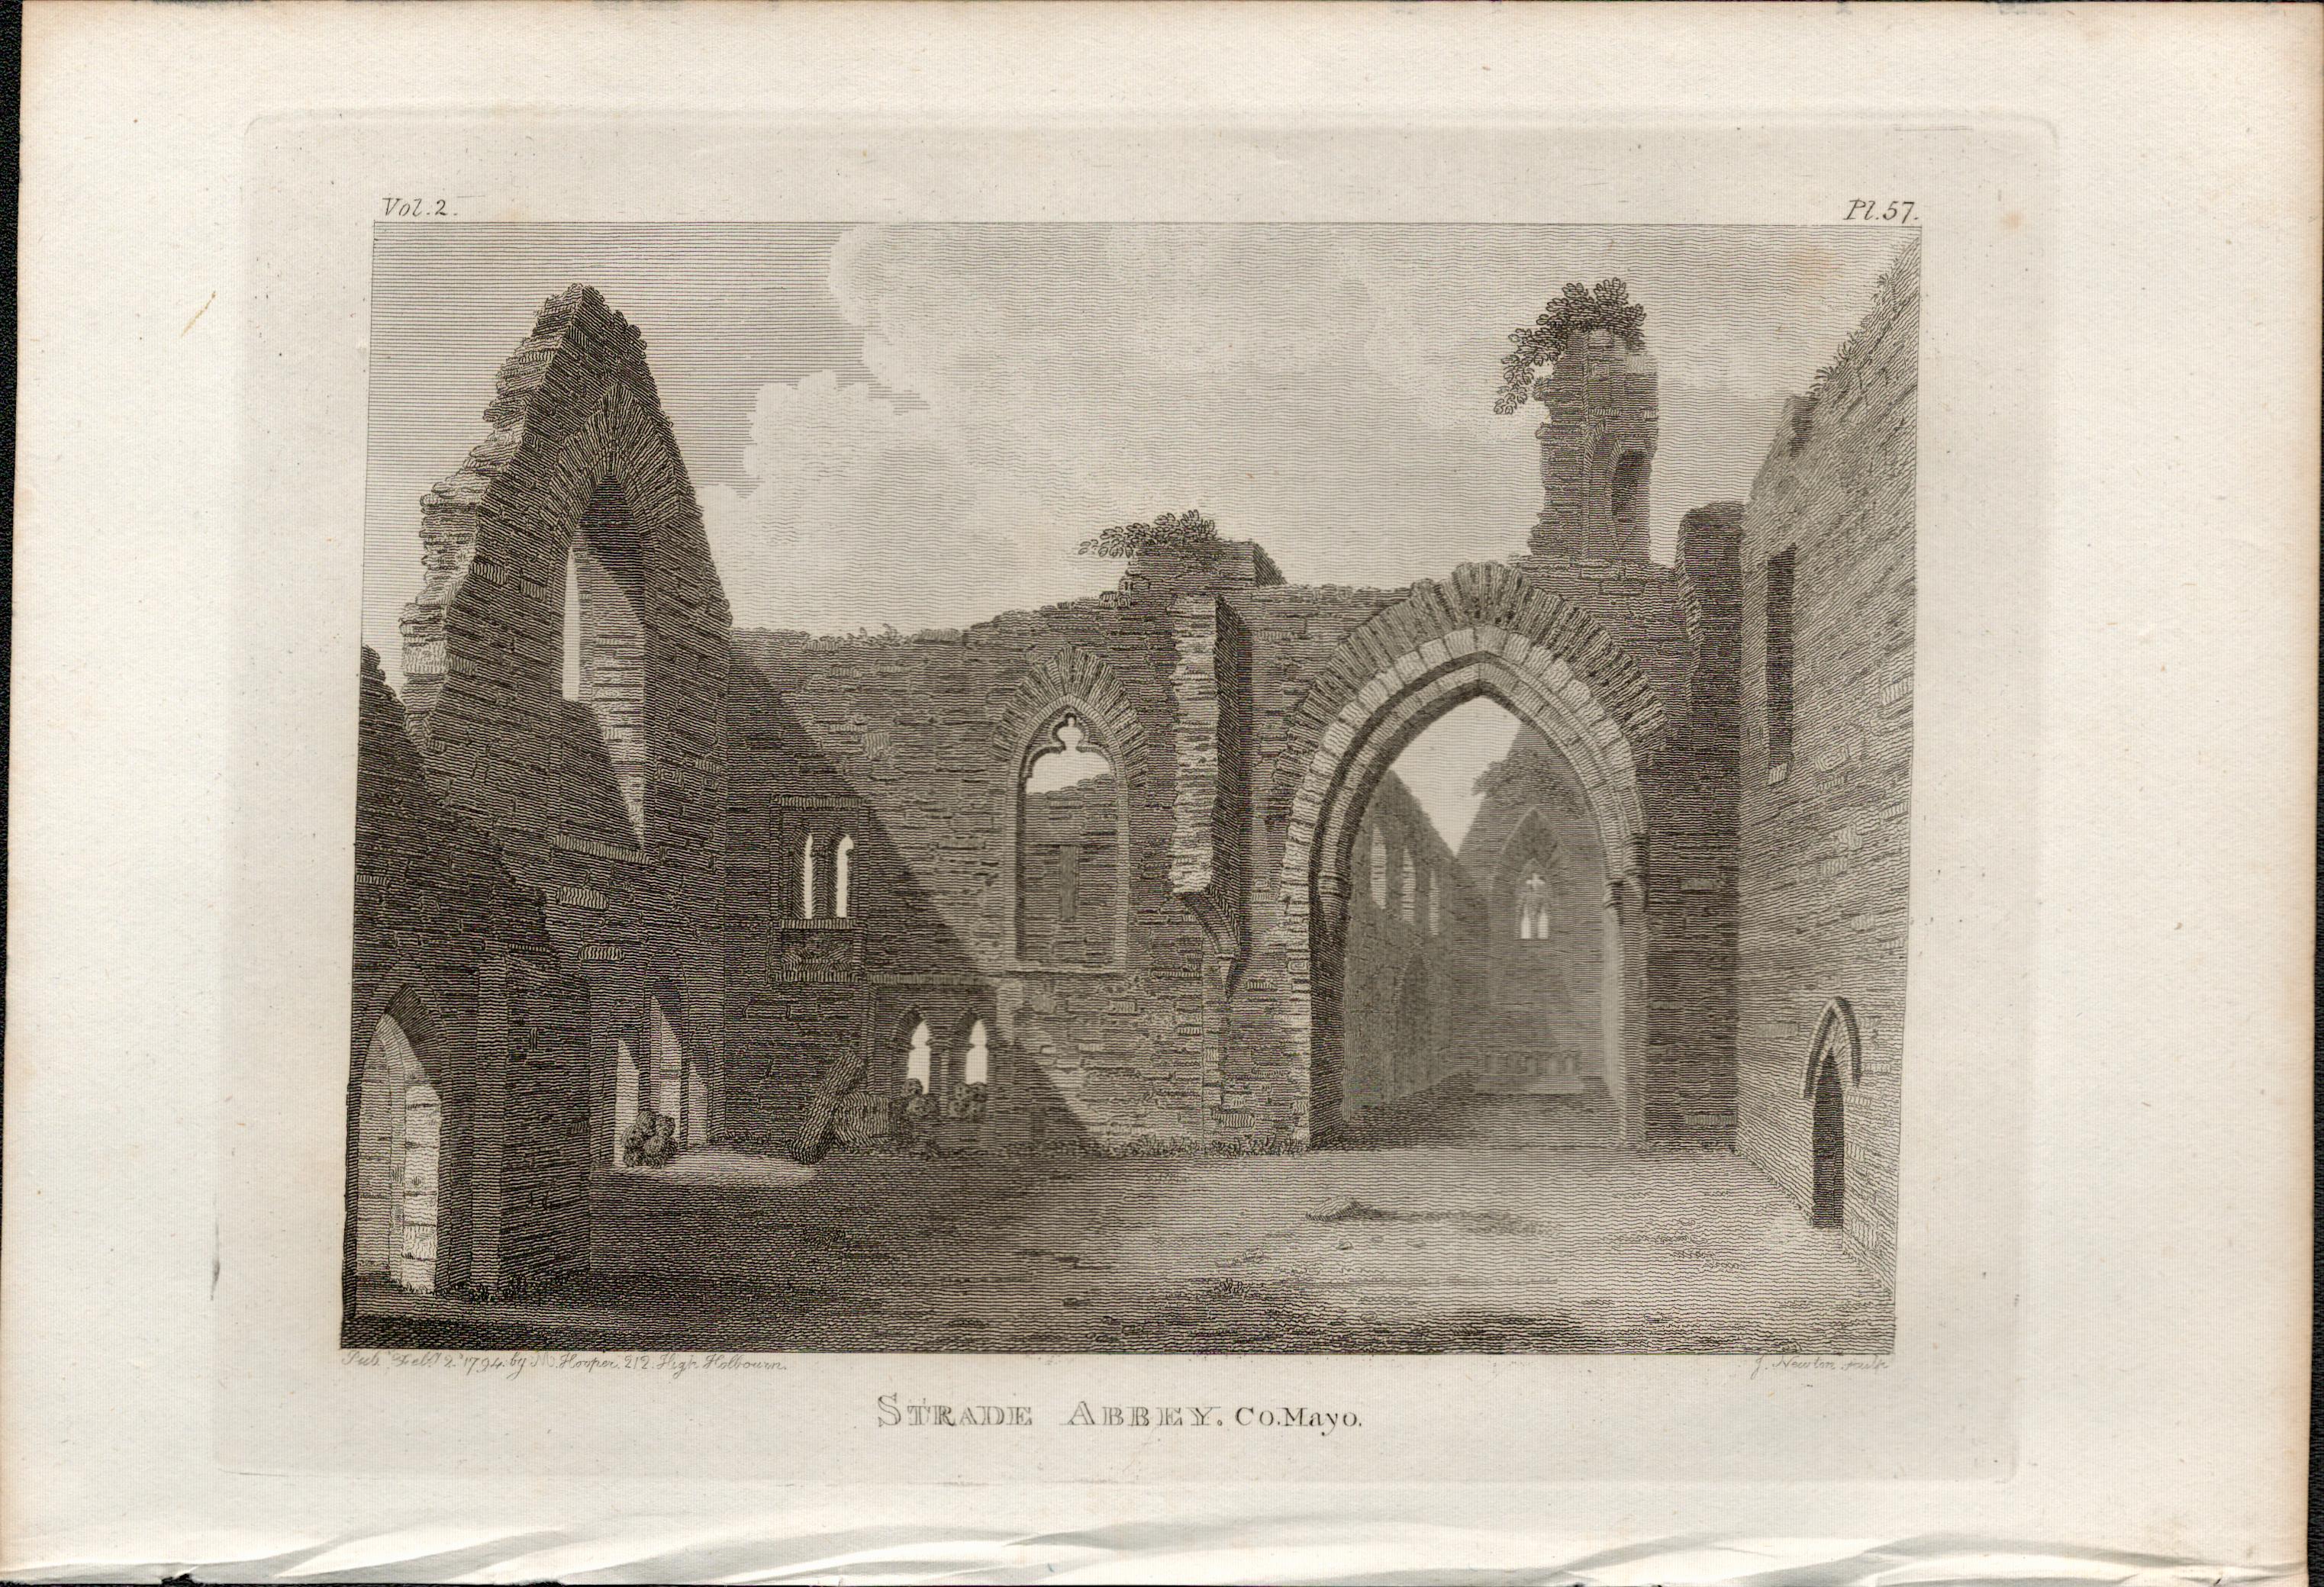 Strade Abbey Co Mayo F. Grose 1794 Antique Copper Block Engraving.